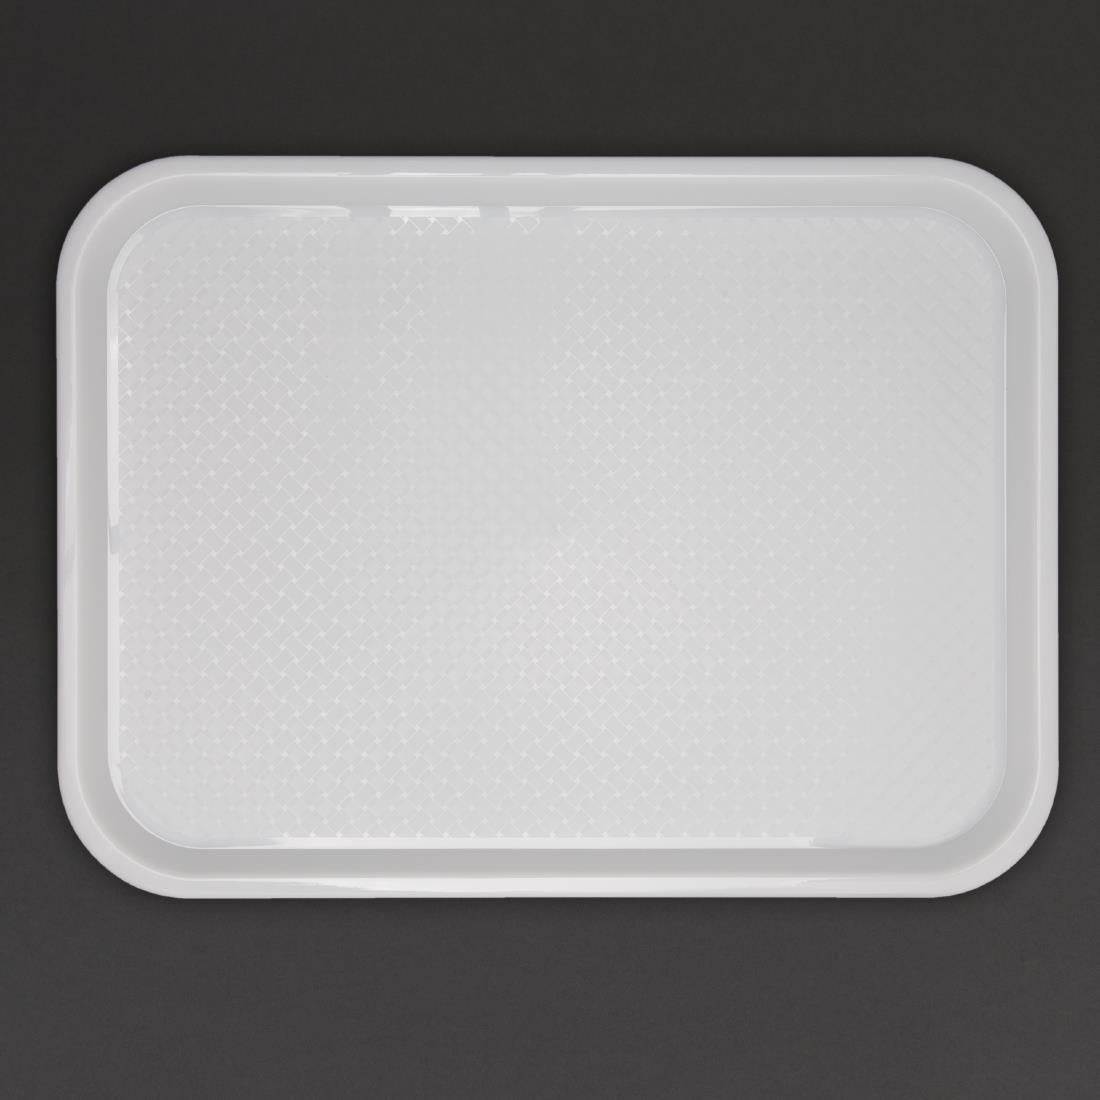 GF995 Kristallon Polypropylene Fast Food Tray White Small 345mm JD Catering Equipment Solutions Ltd